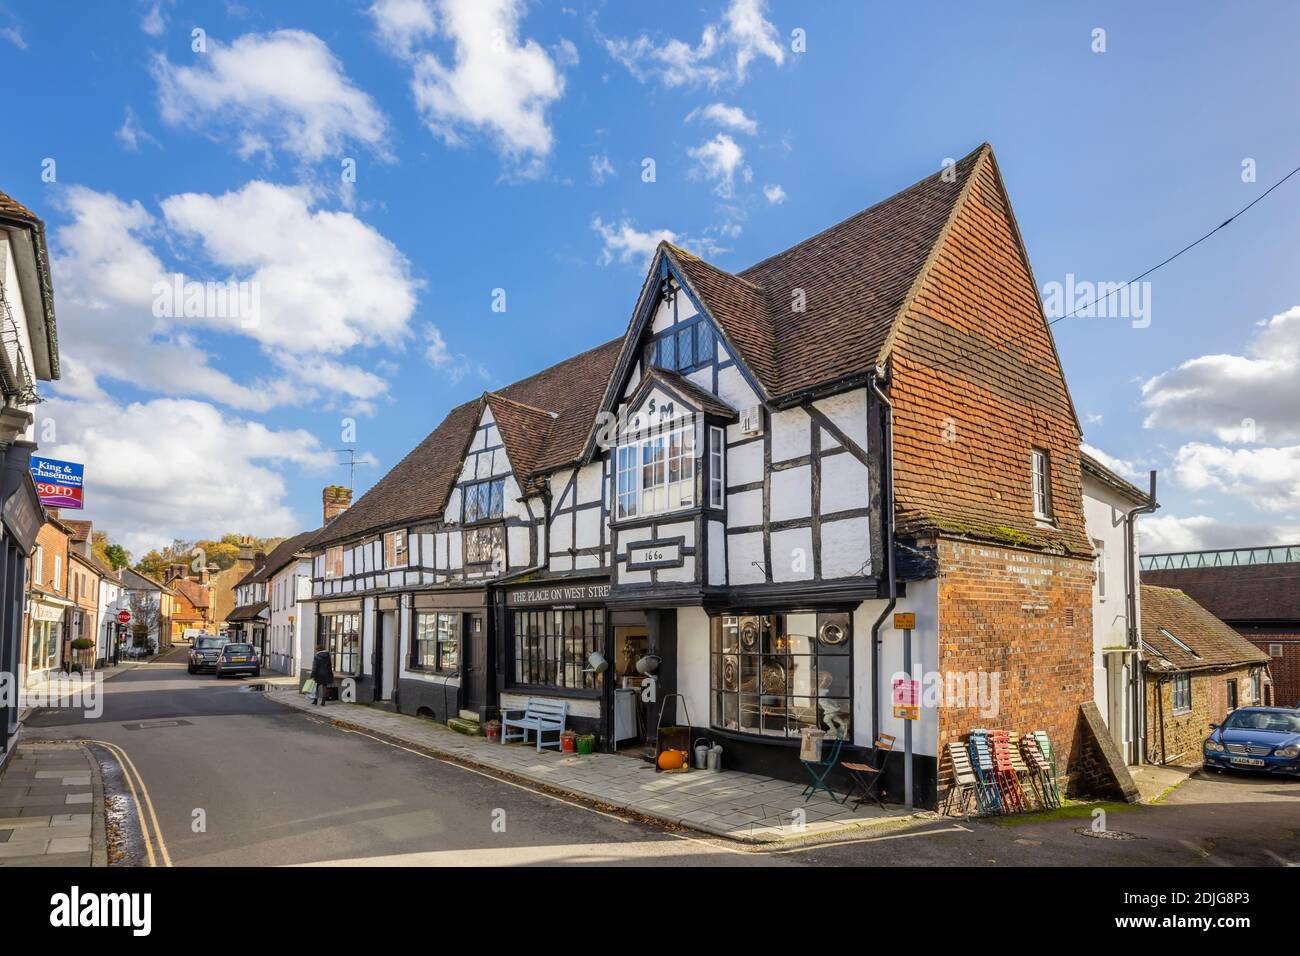 The Place on West Street and antique shops in historic black and white timbered buildings, West Street, Midhurst, a town in West Sussex, SE England Stock Photo